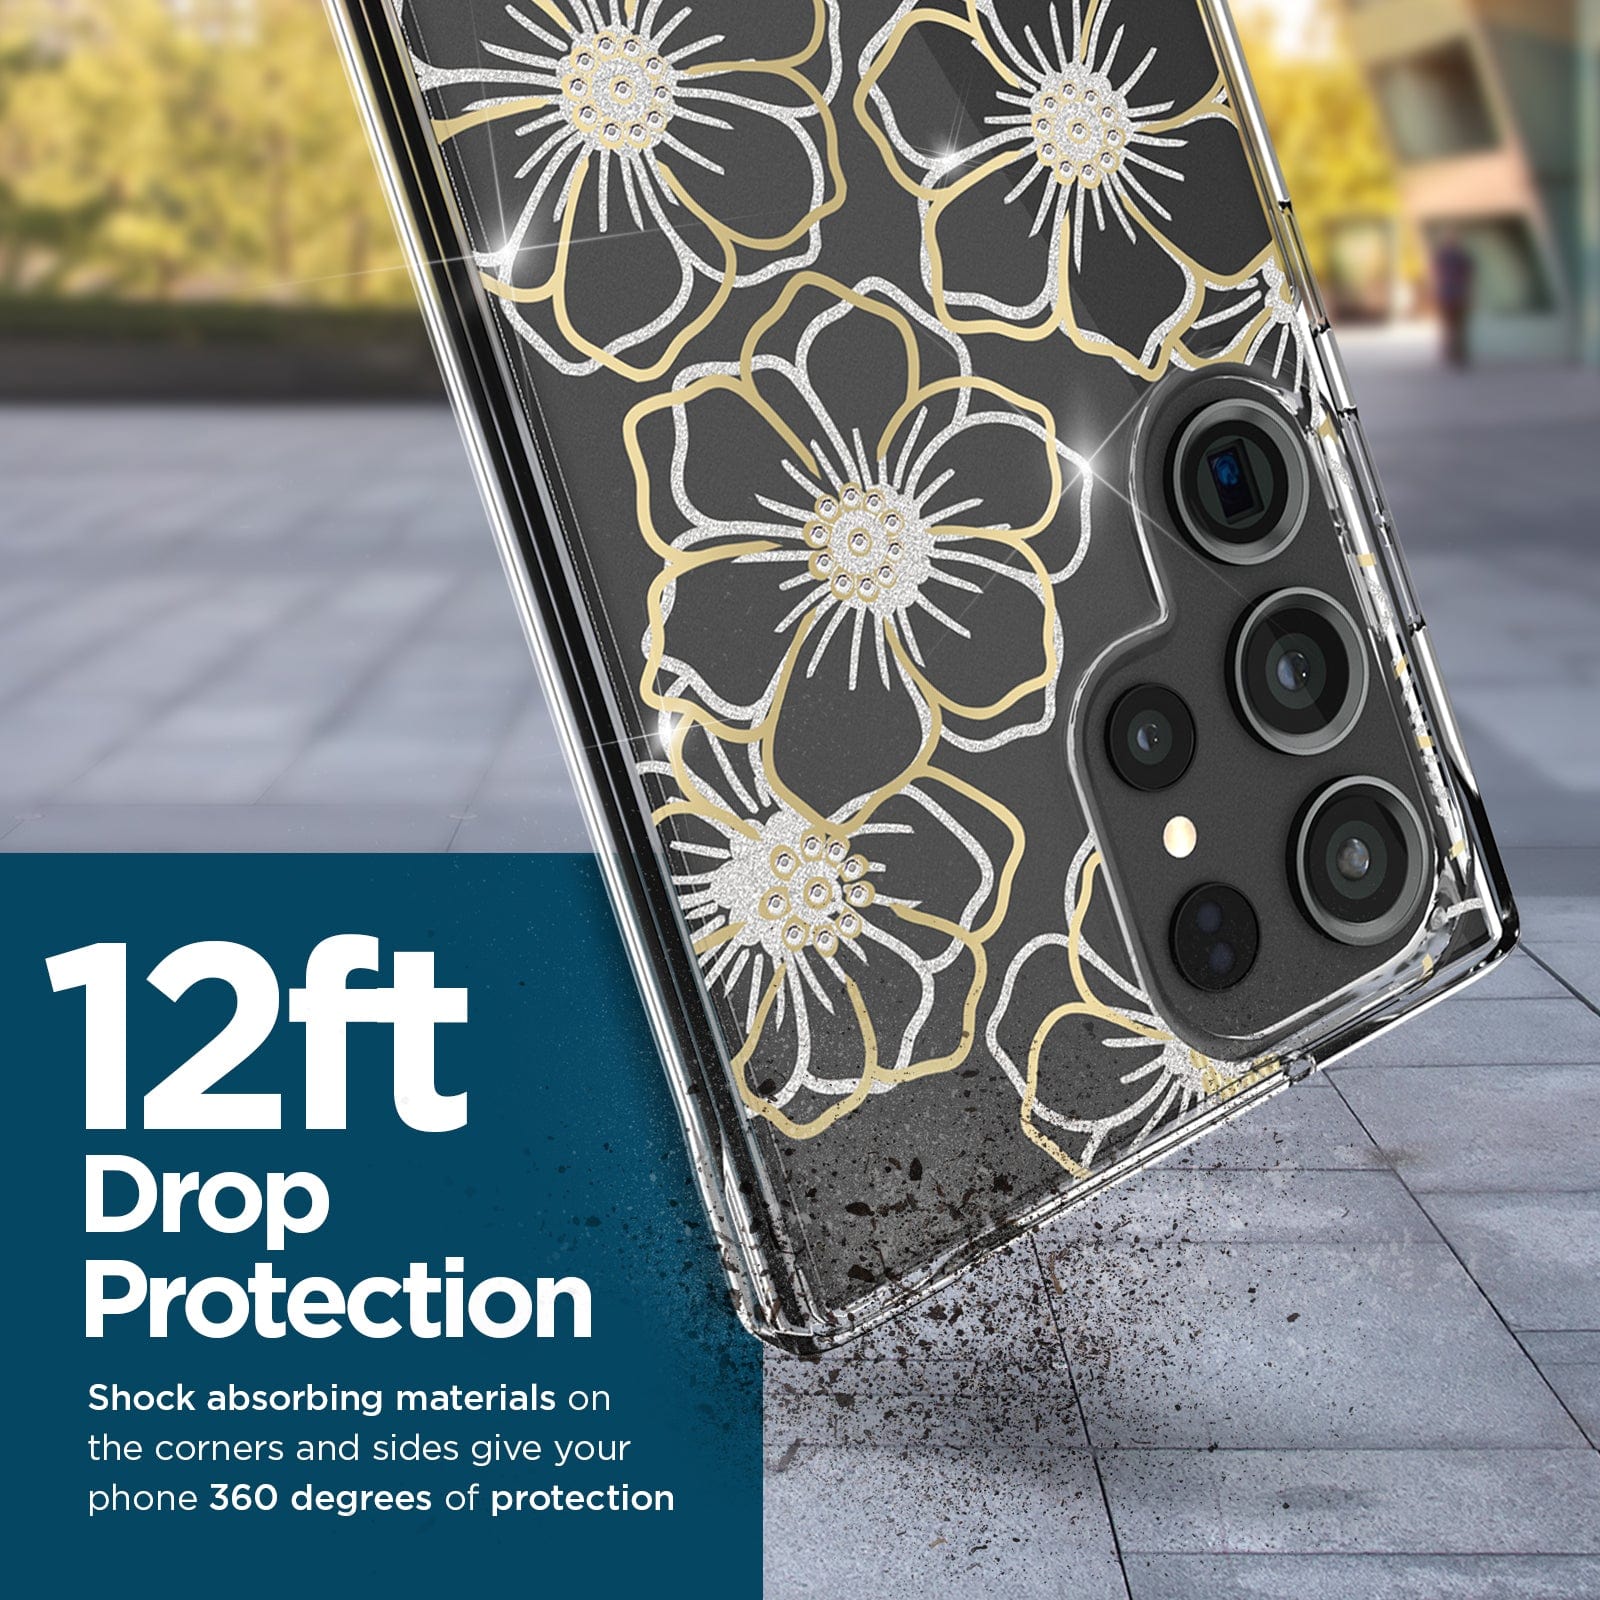 12 FOOT DROP PROTECTION. SHOCK ABSORBING MATERIALS ONT HE CORNERS AND SIDES GIVE YOUR PHONE 360 DEGREES OF PROTECTION